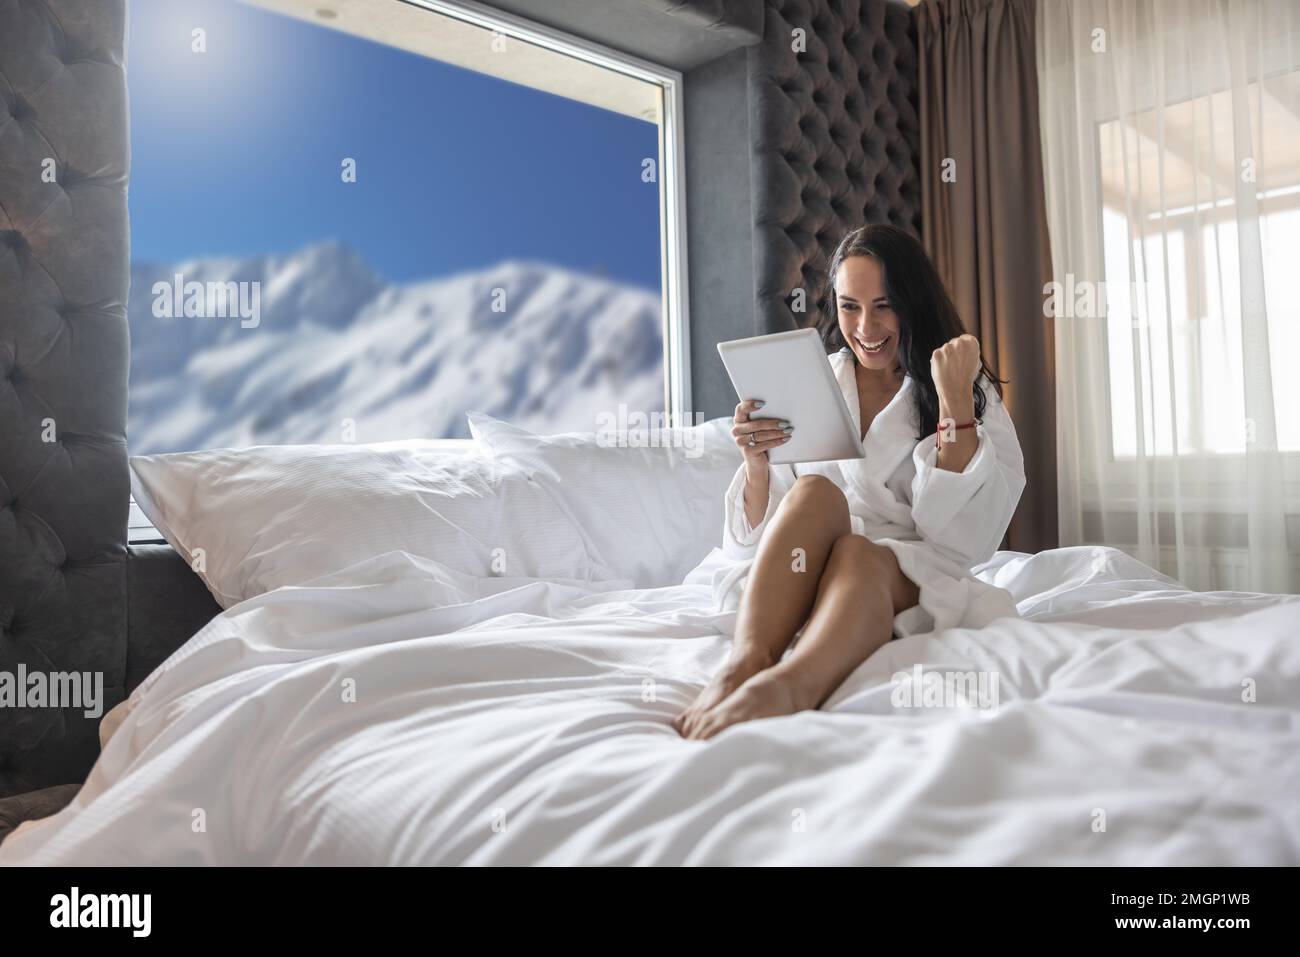 Young woman celebrating winning an online lottery or she made a good deal at hotel room with a cheerful face expression. Stock Photo